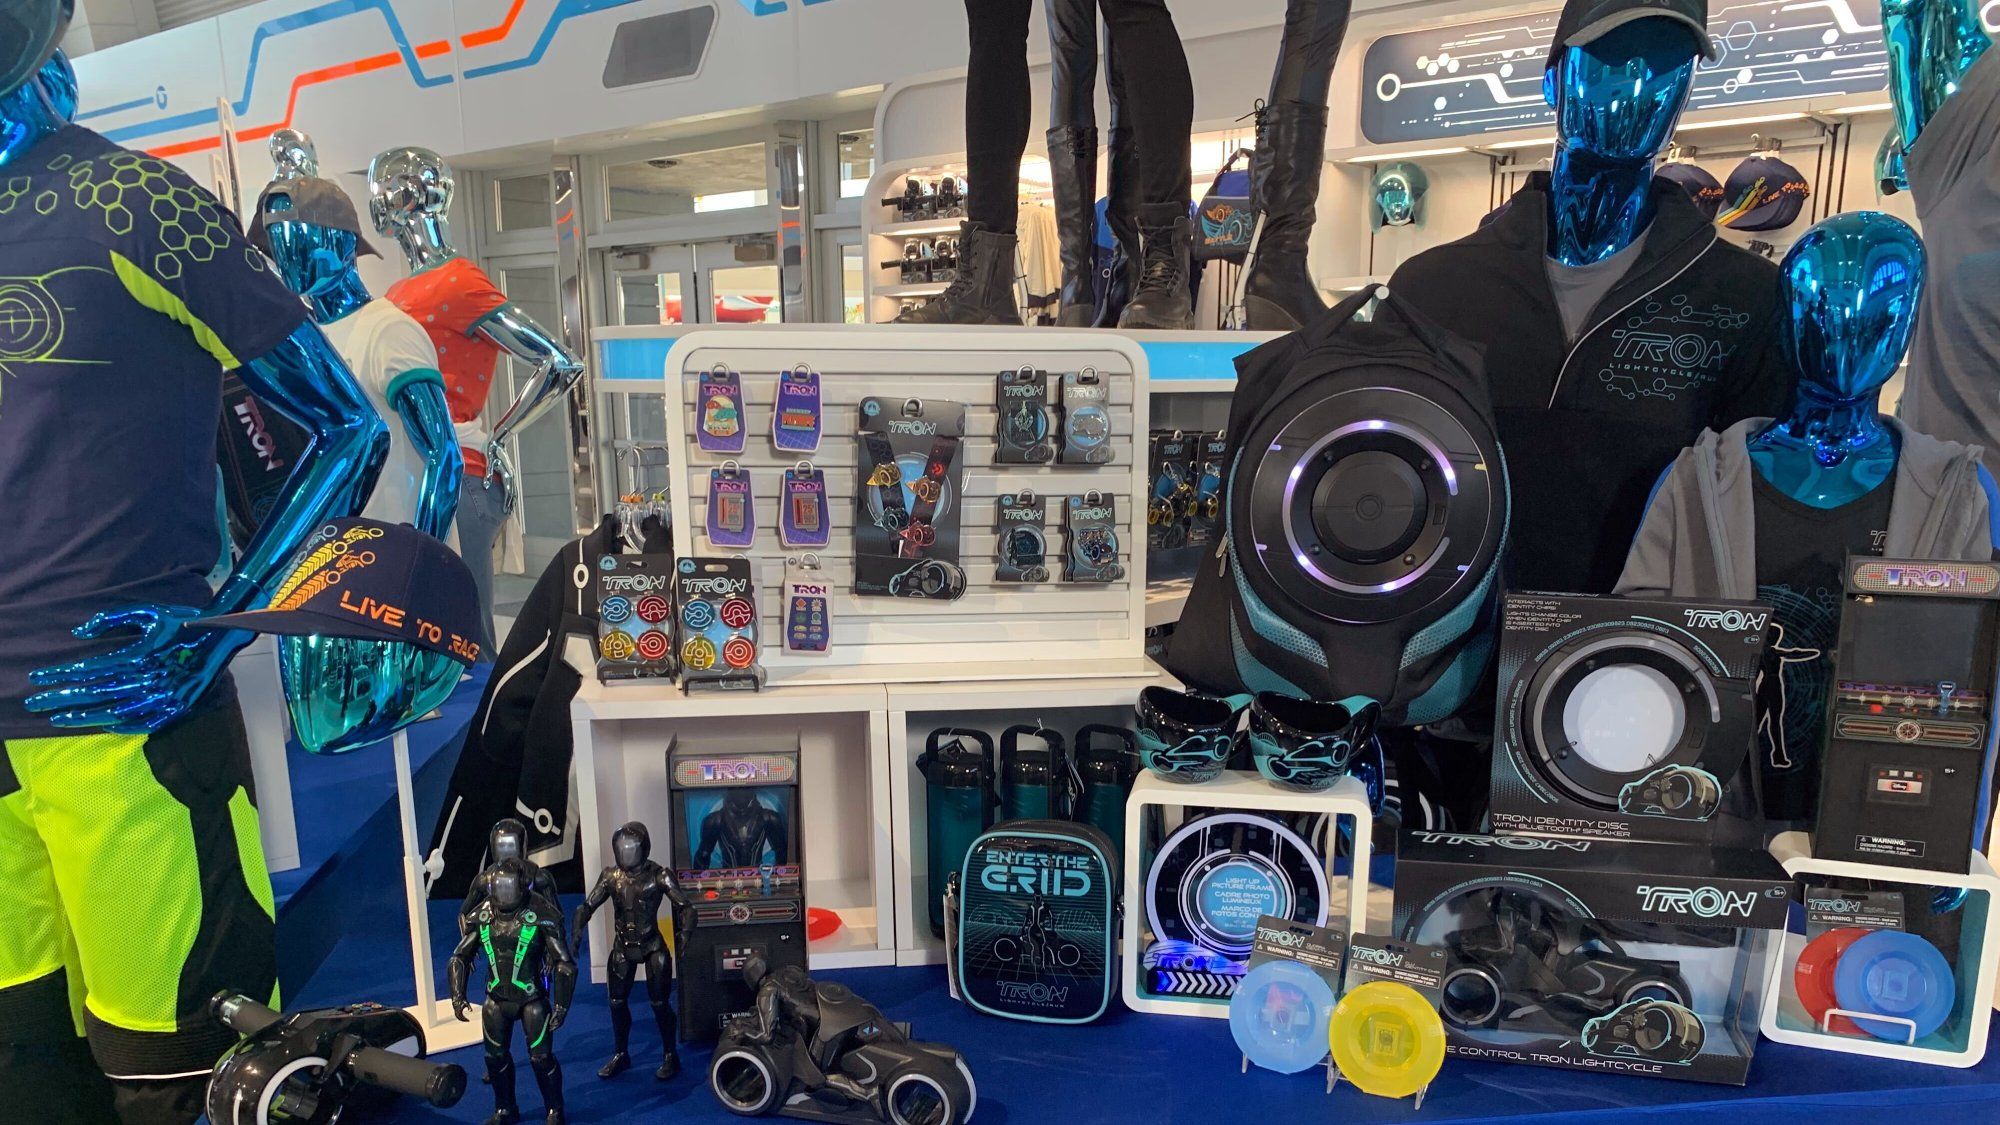 The Tron Lightcycle / Run attraction has a gift shop where guests can customize Tron action figures.